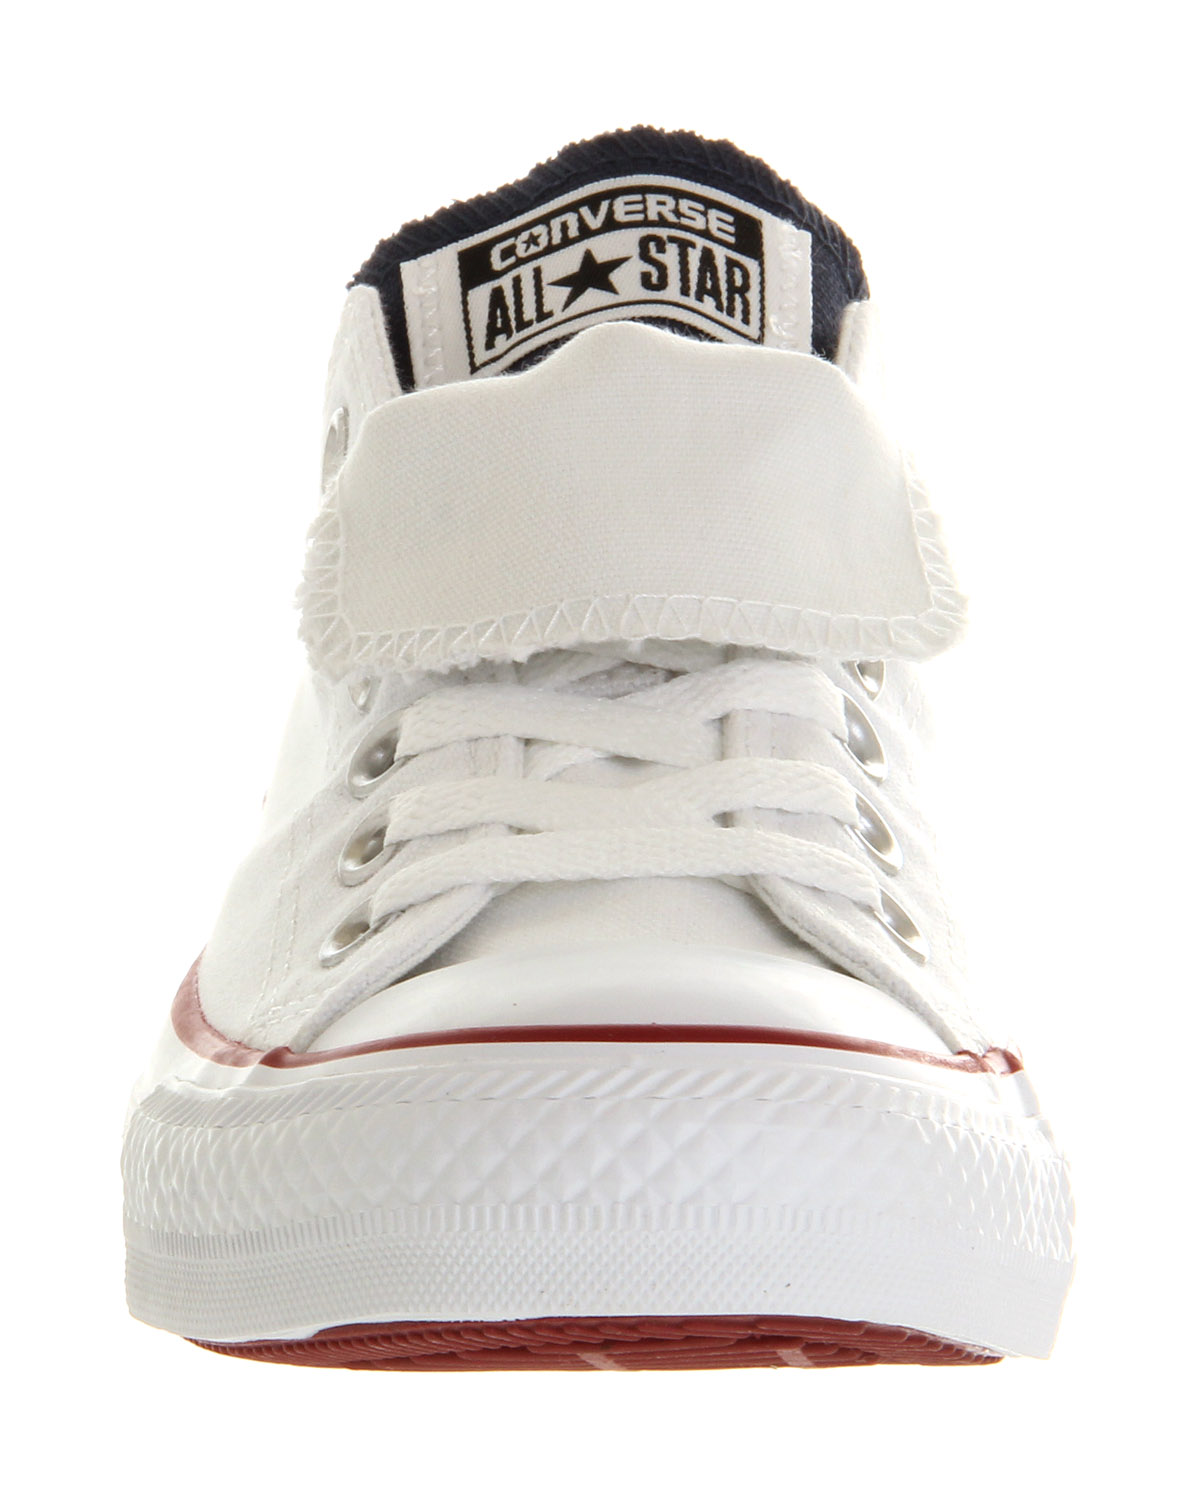 converse allstar low double tongue white blue red